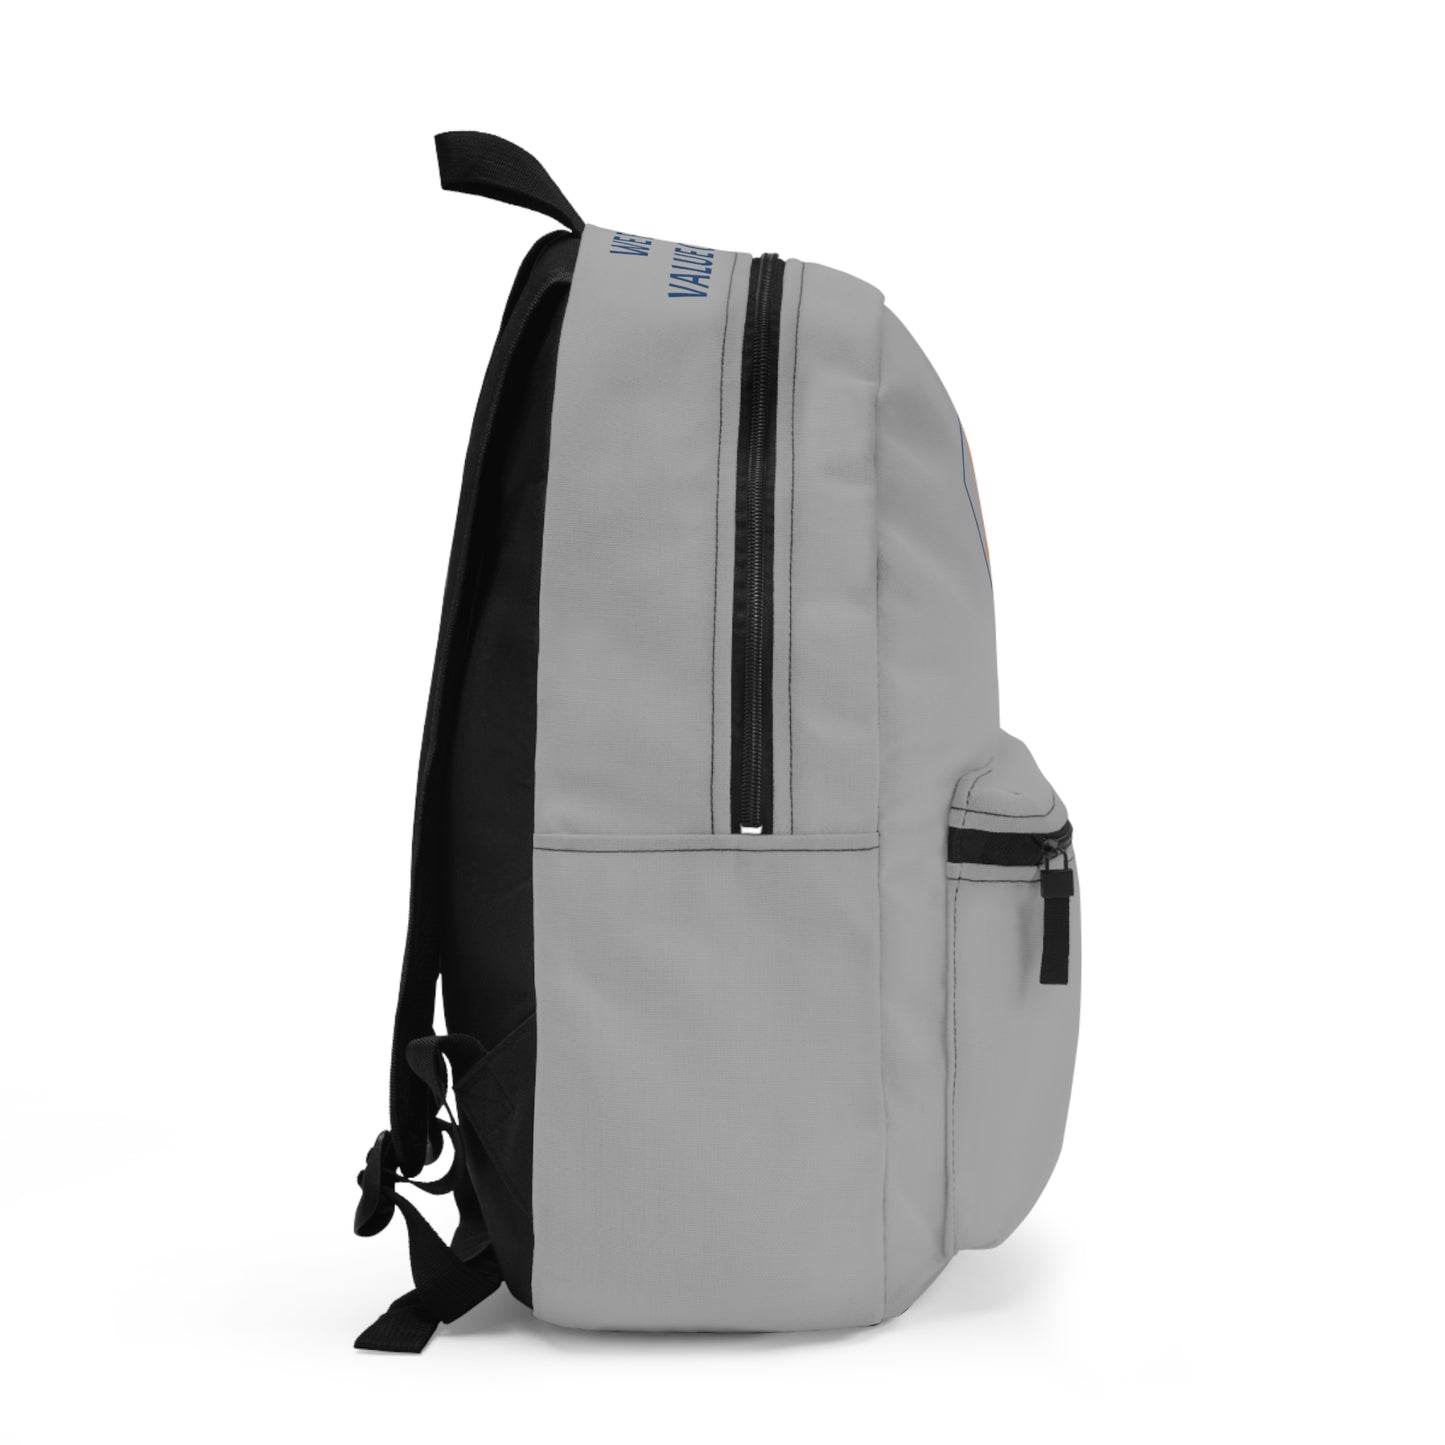 Meicher - Grey Logo Only Backpack Top We Believe